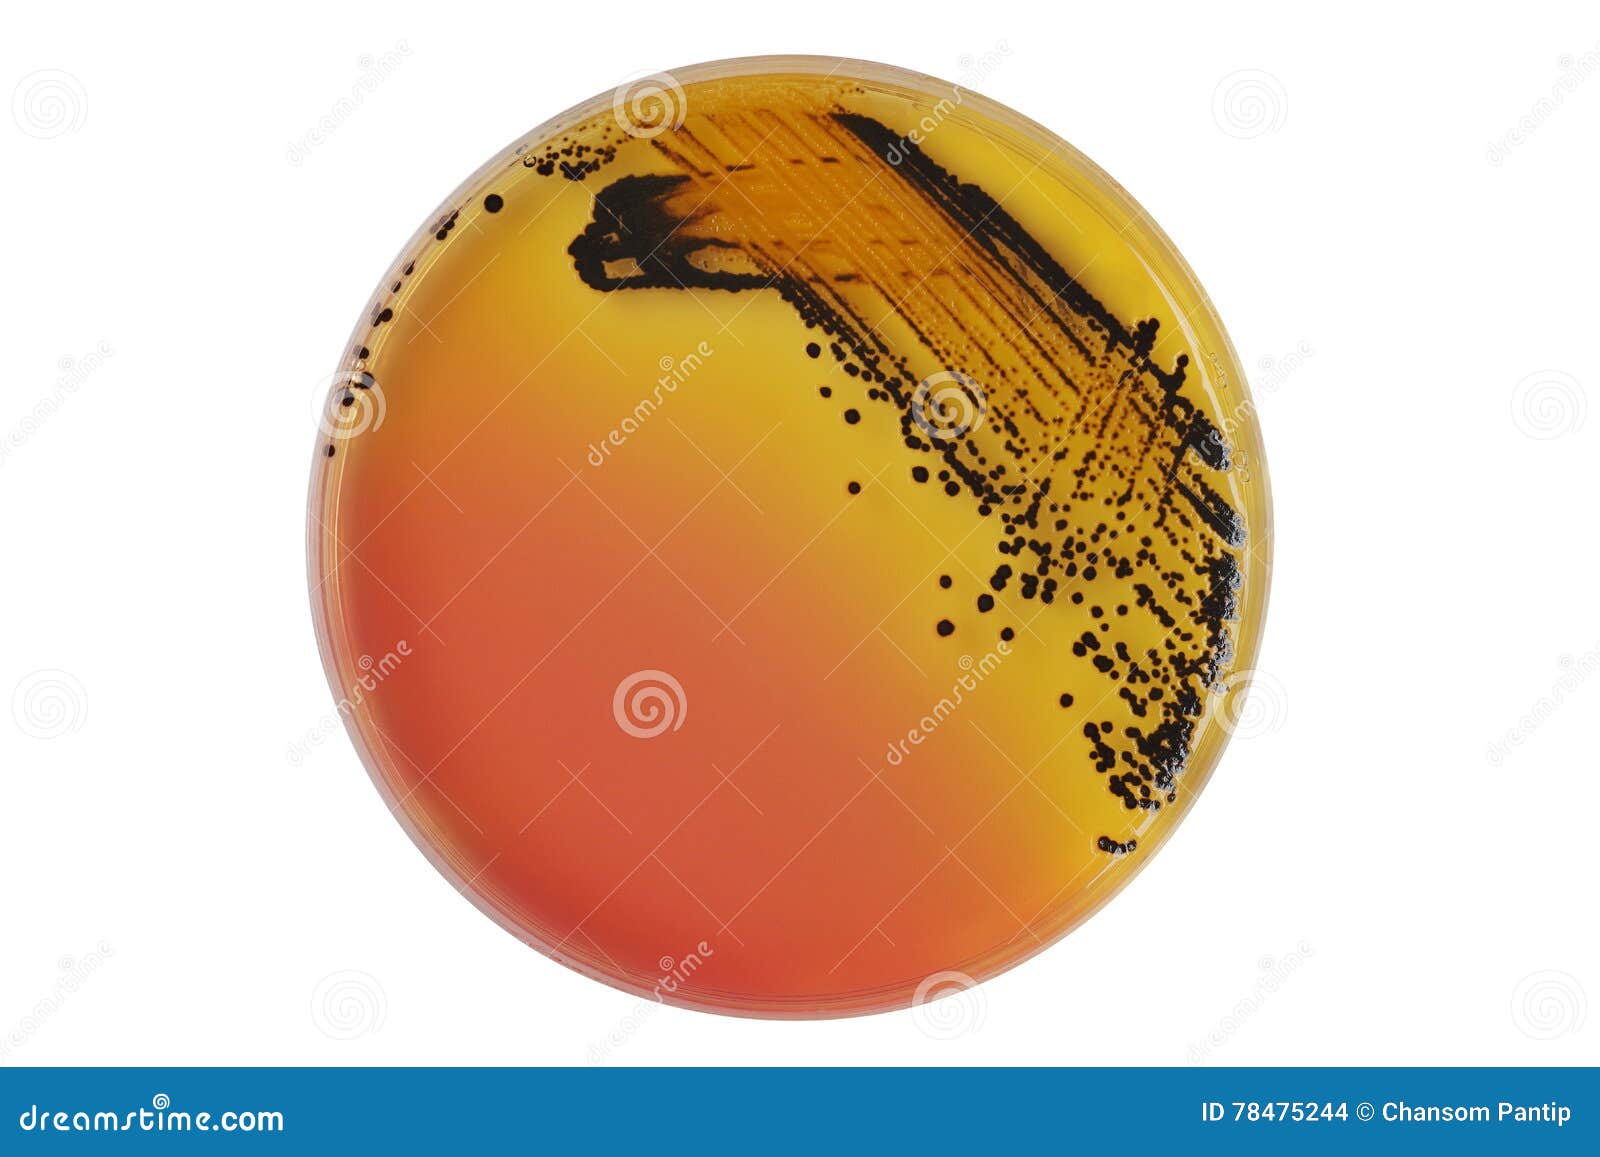 black bacterial colonies of salmonella species on salmonella shigella agar (ss agar, selective and differential medium) plate on